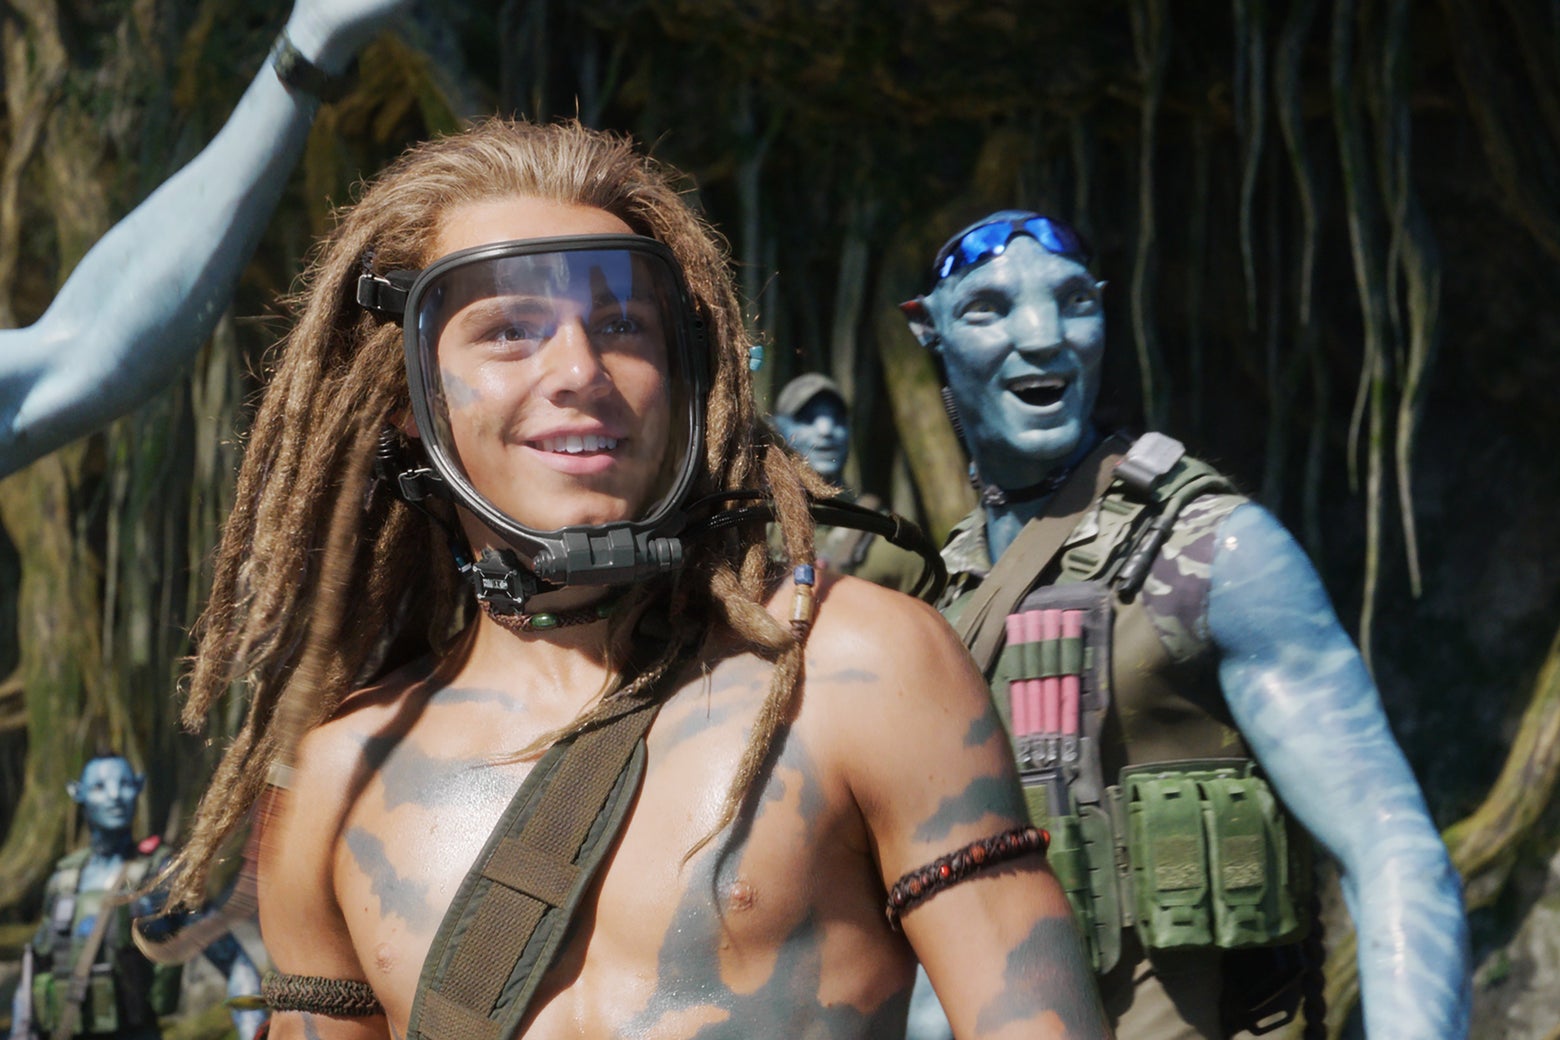 Avatar is Still the Highest-Grossing Movie of All Time, and Here's Why